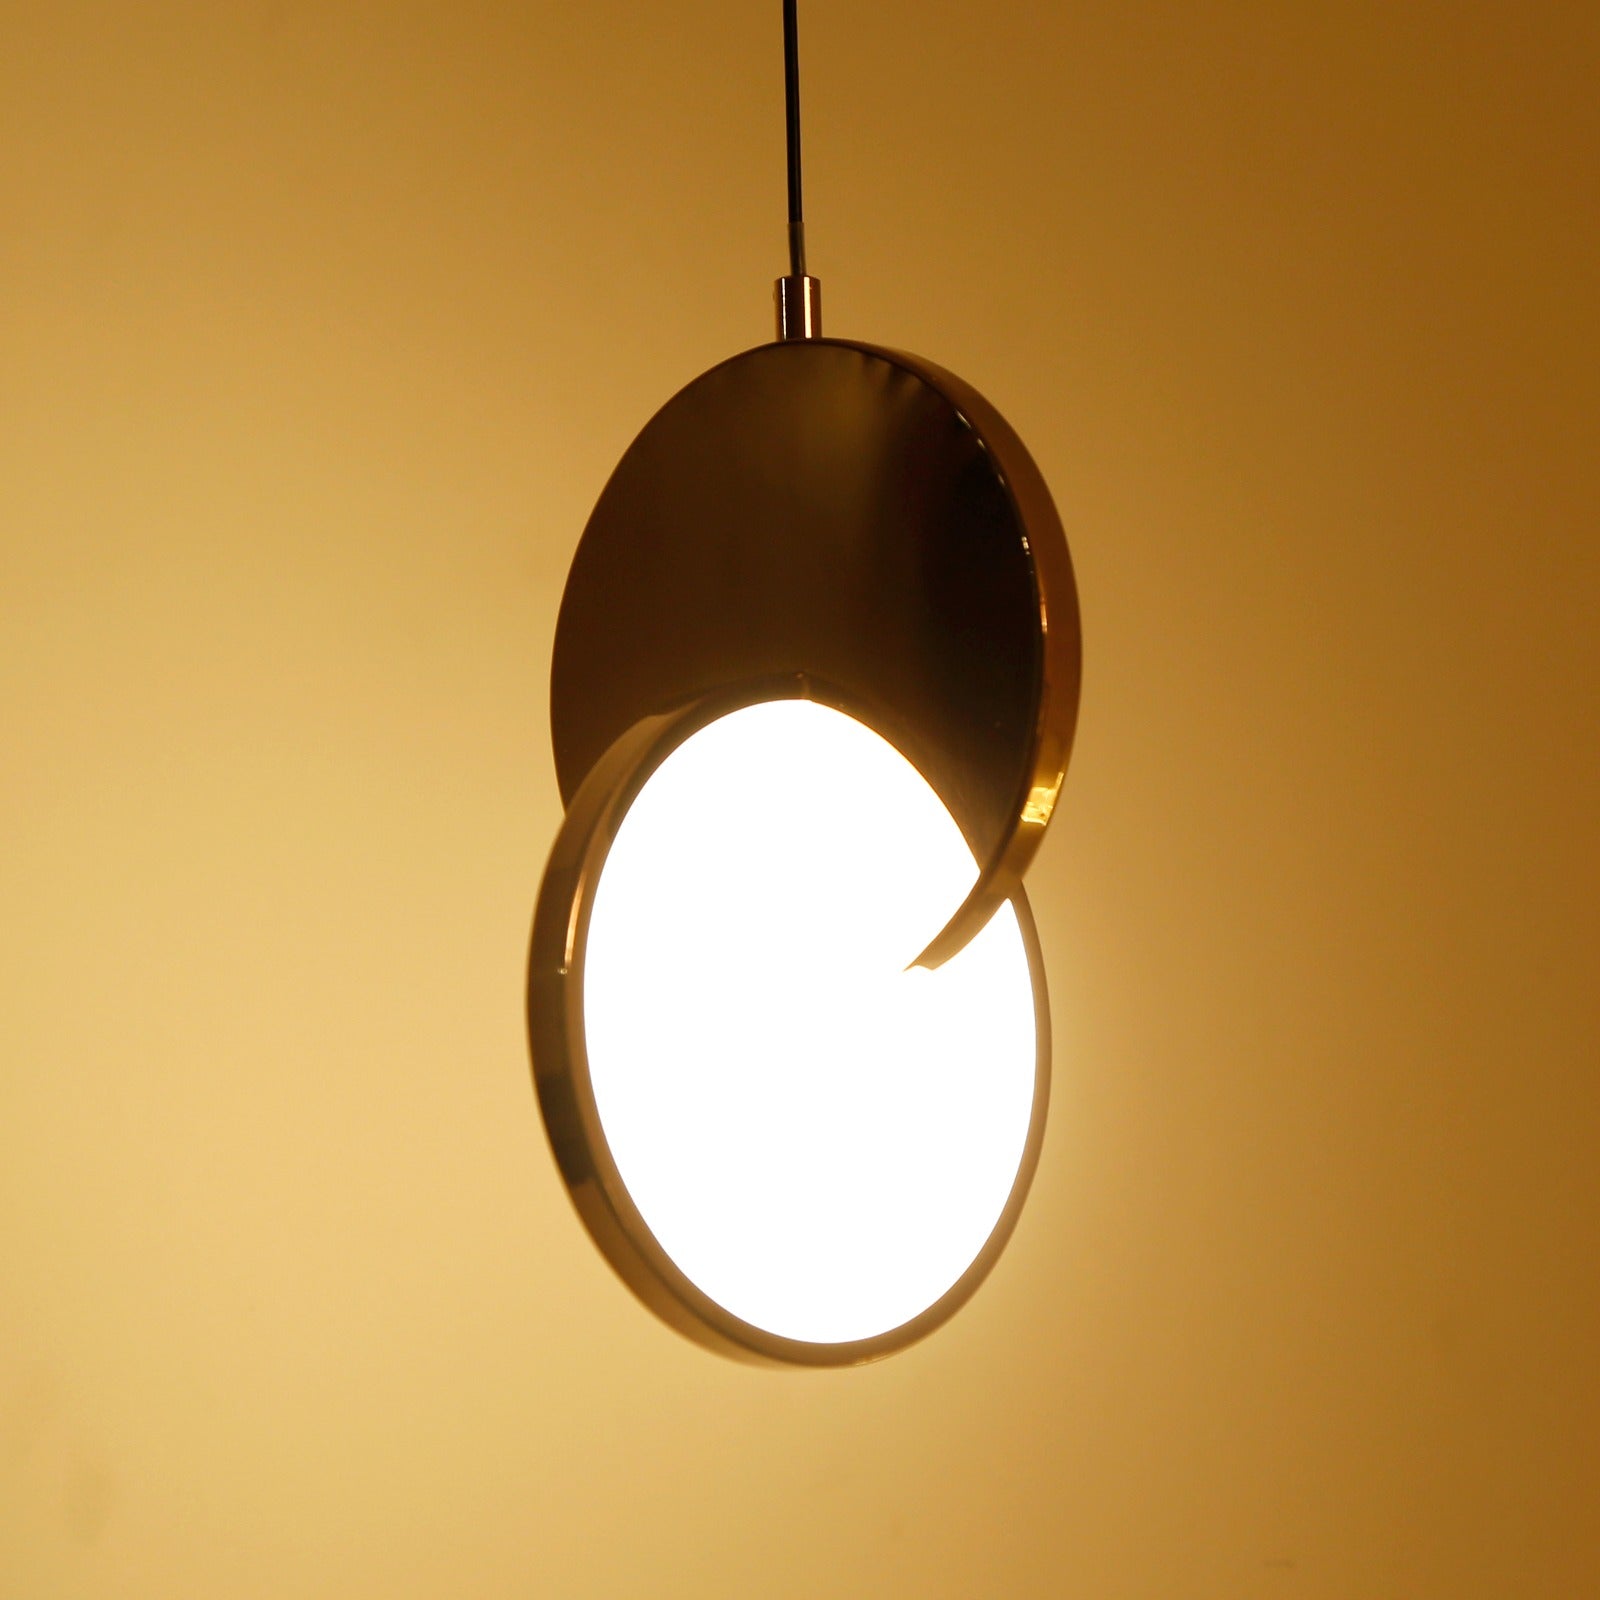 Shop Up in the Air Rose Gold LED Pendant Light online